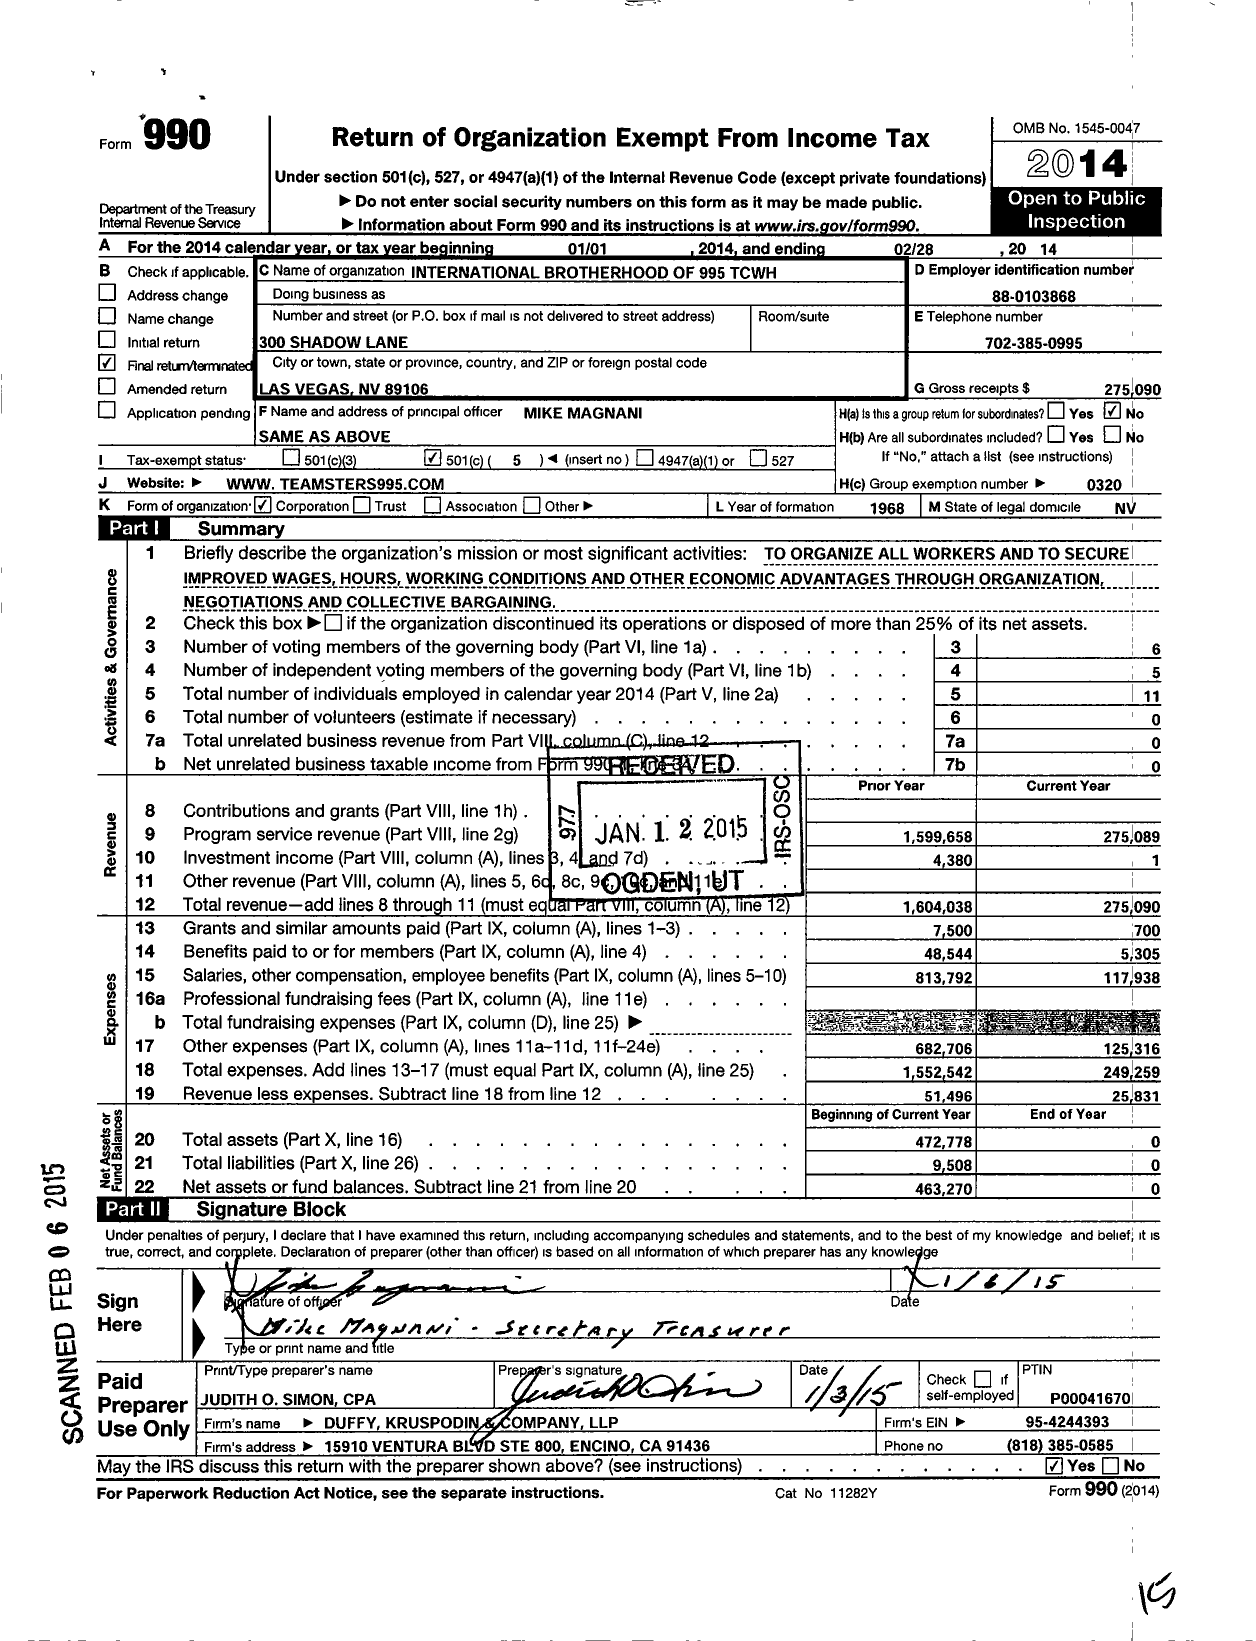 Image of first page of 2013 Form 990O for Teamsters - 995 Teamster Local Union